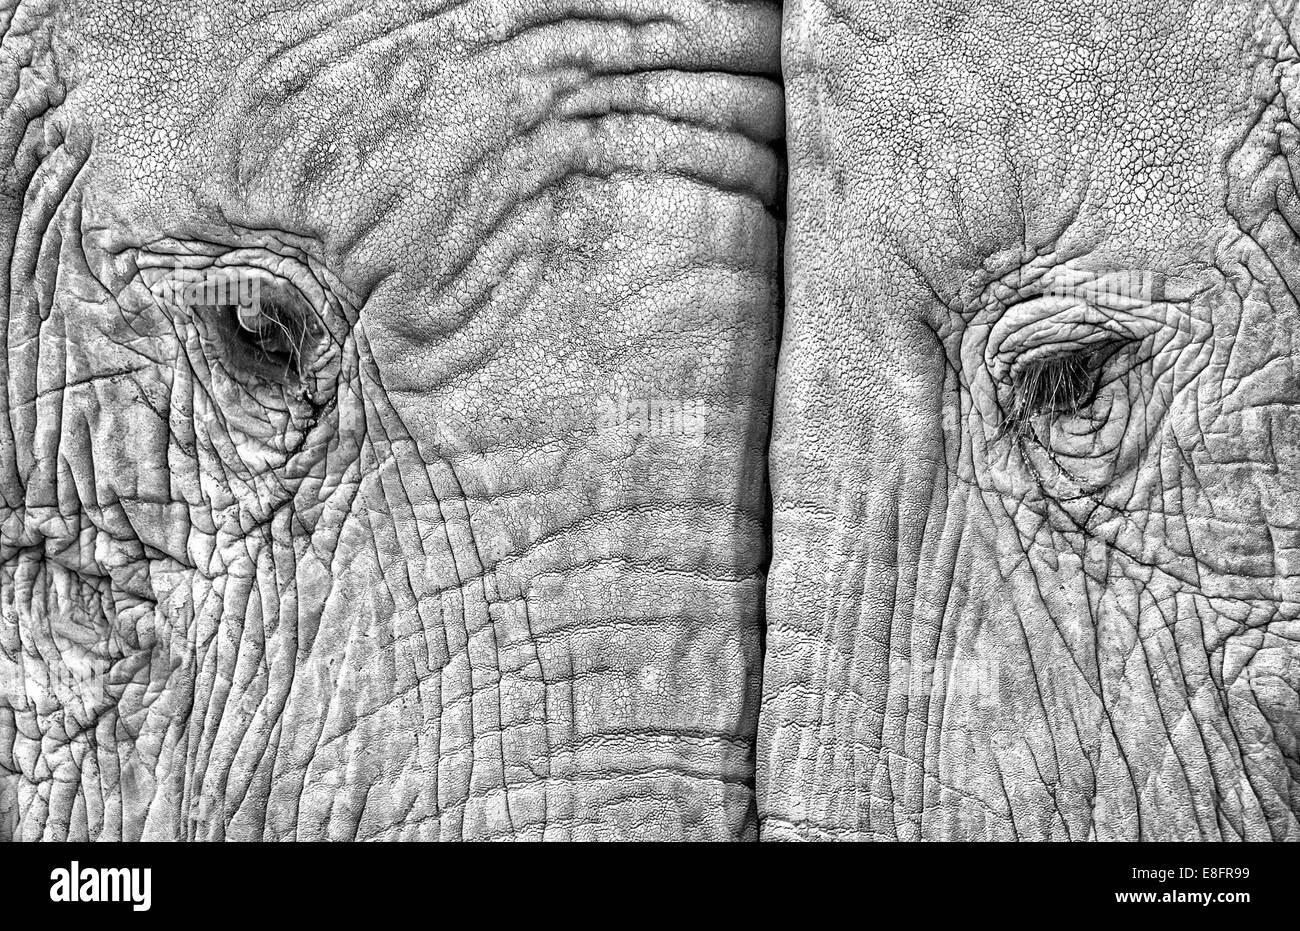 Close-up of two elephants standing face to face Stock Photo